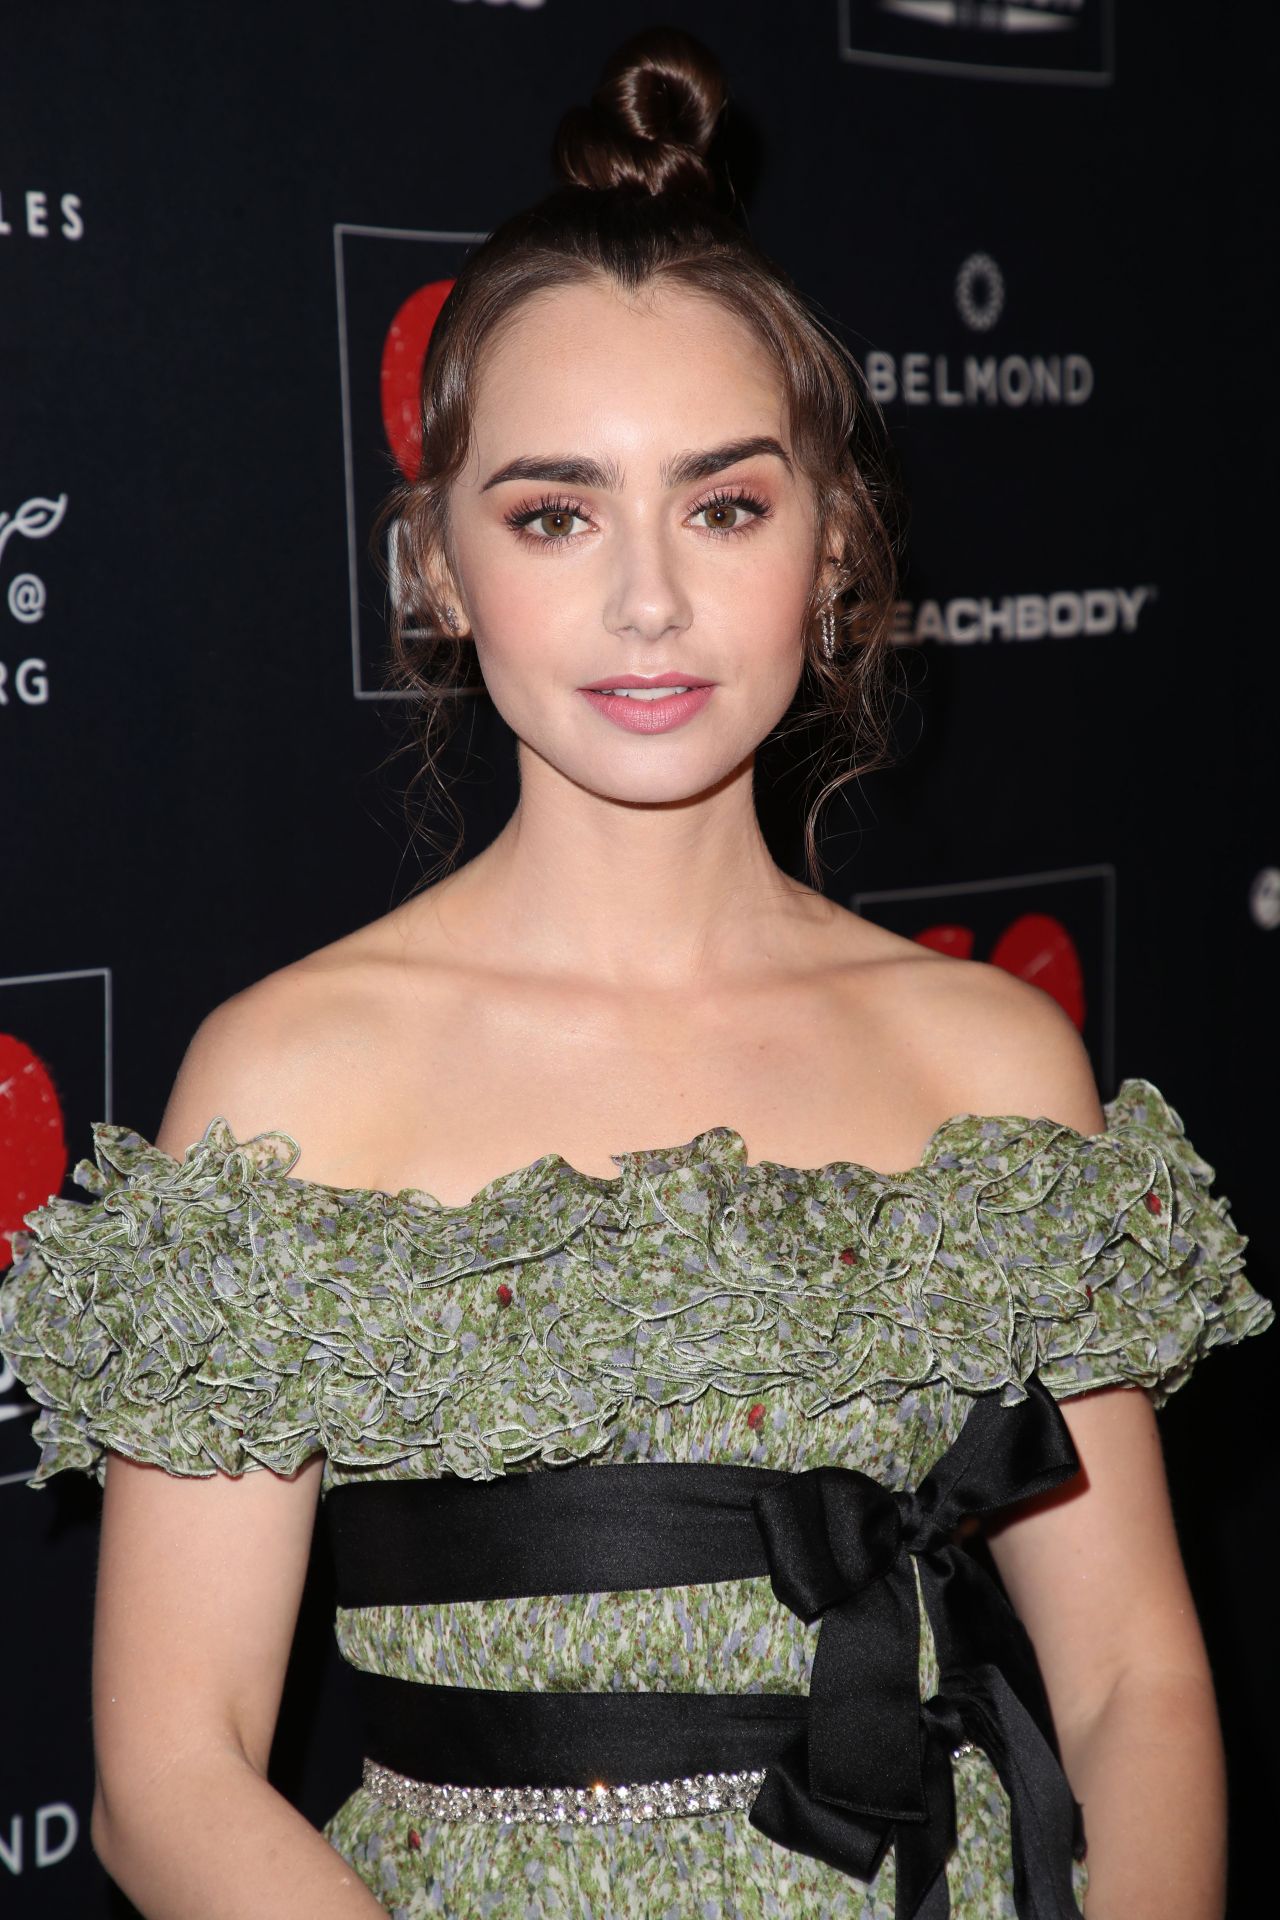 lily-collins-go-campaign-gala-in-los-angeles-10-20-2018-5.jpg